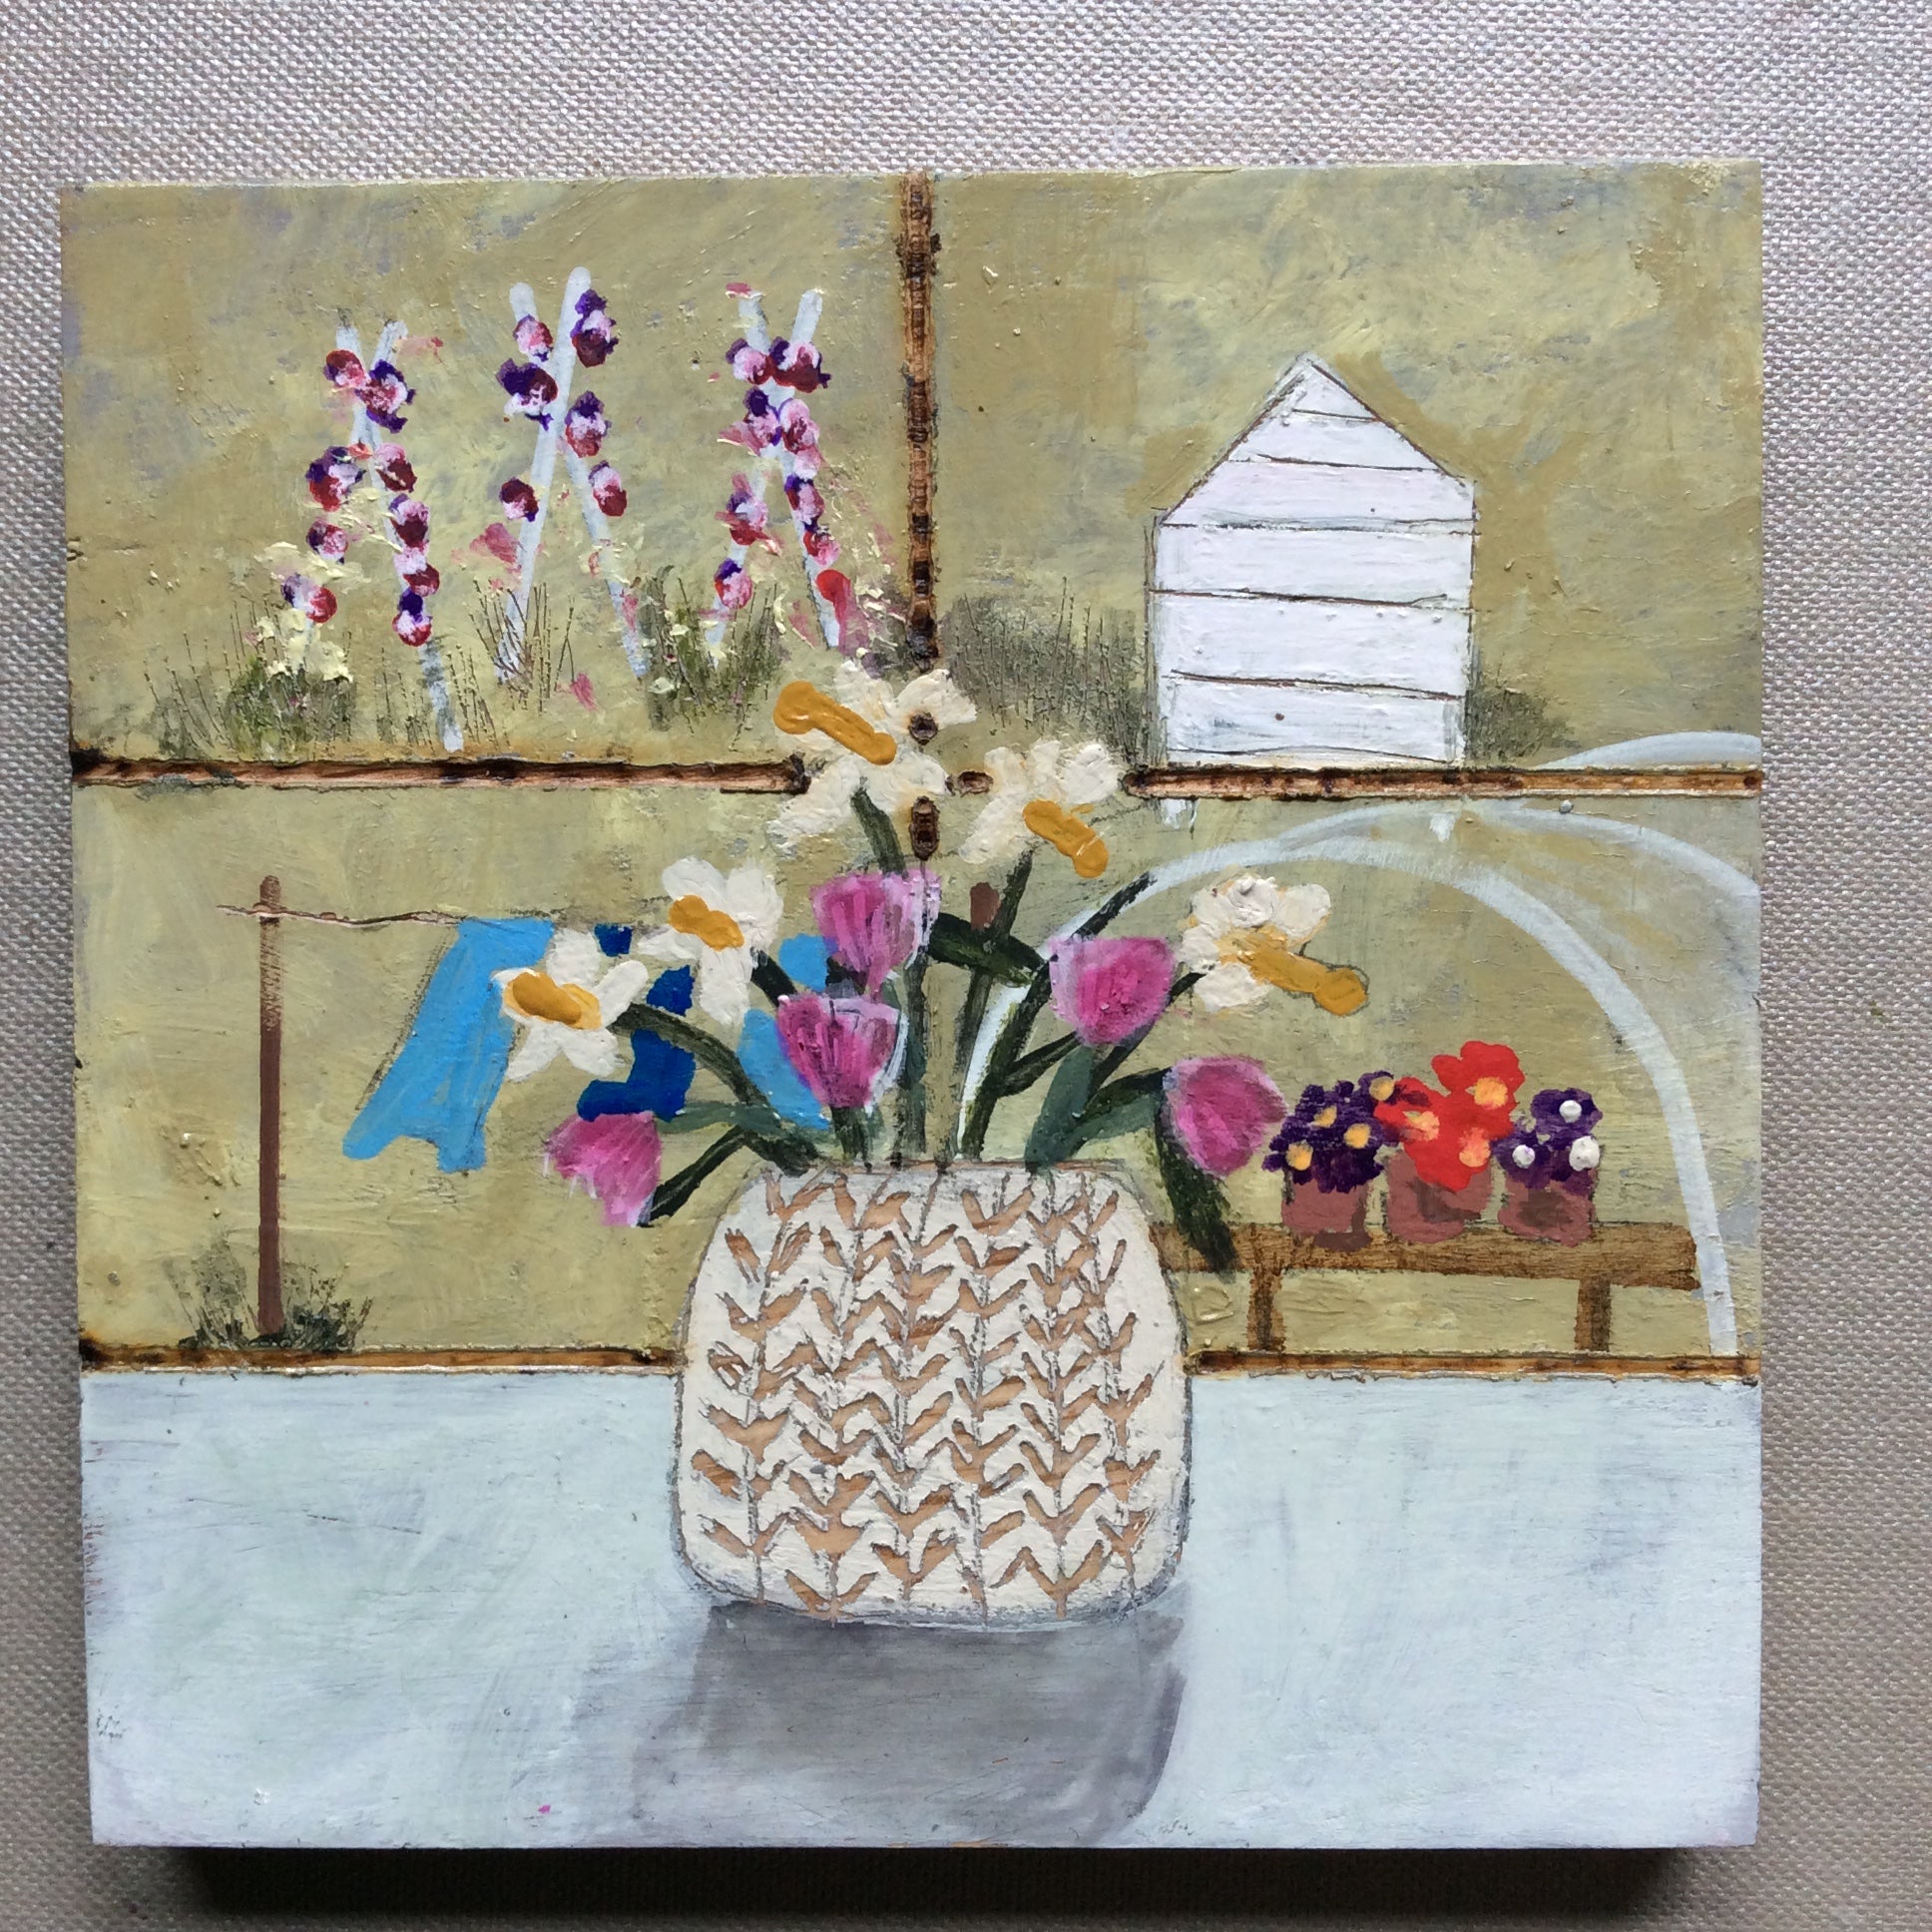 Mixed Media art on wood By Louise O’Hara  “Spring is in the air”